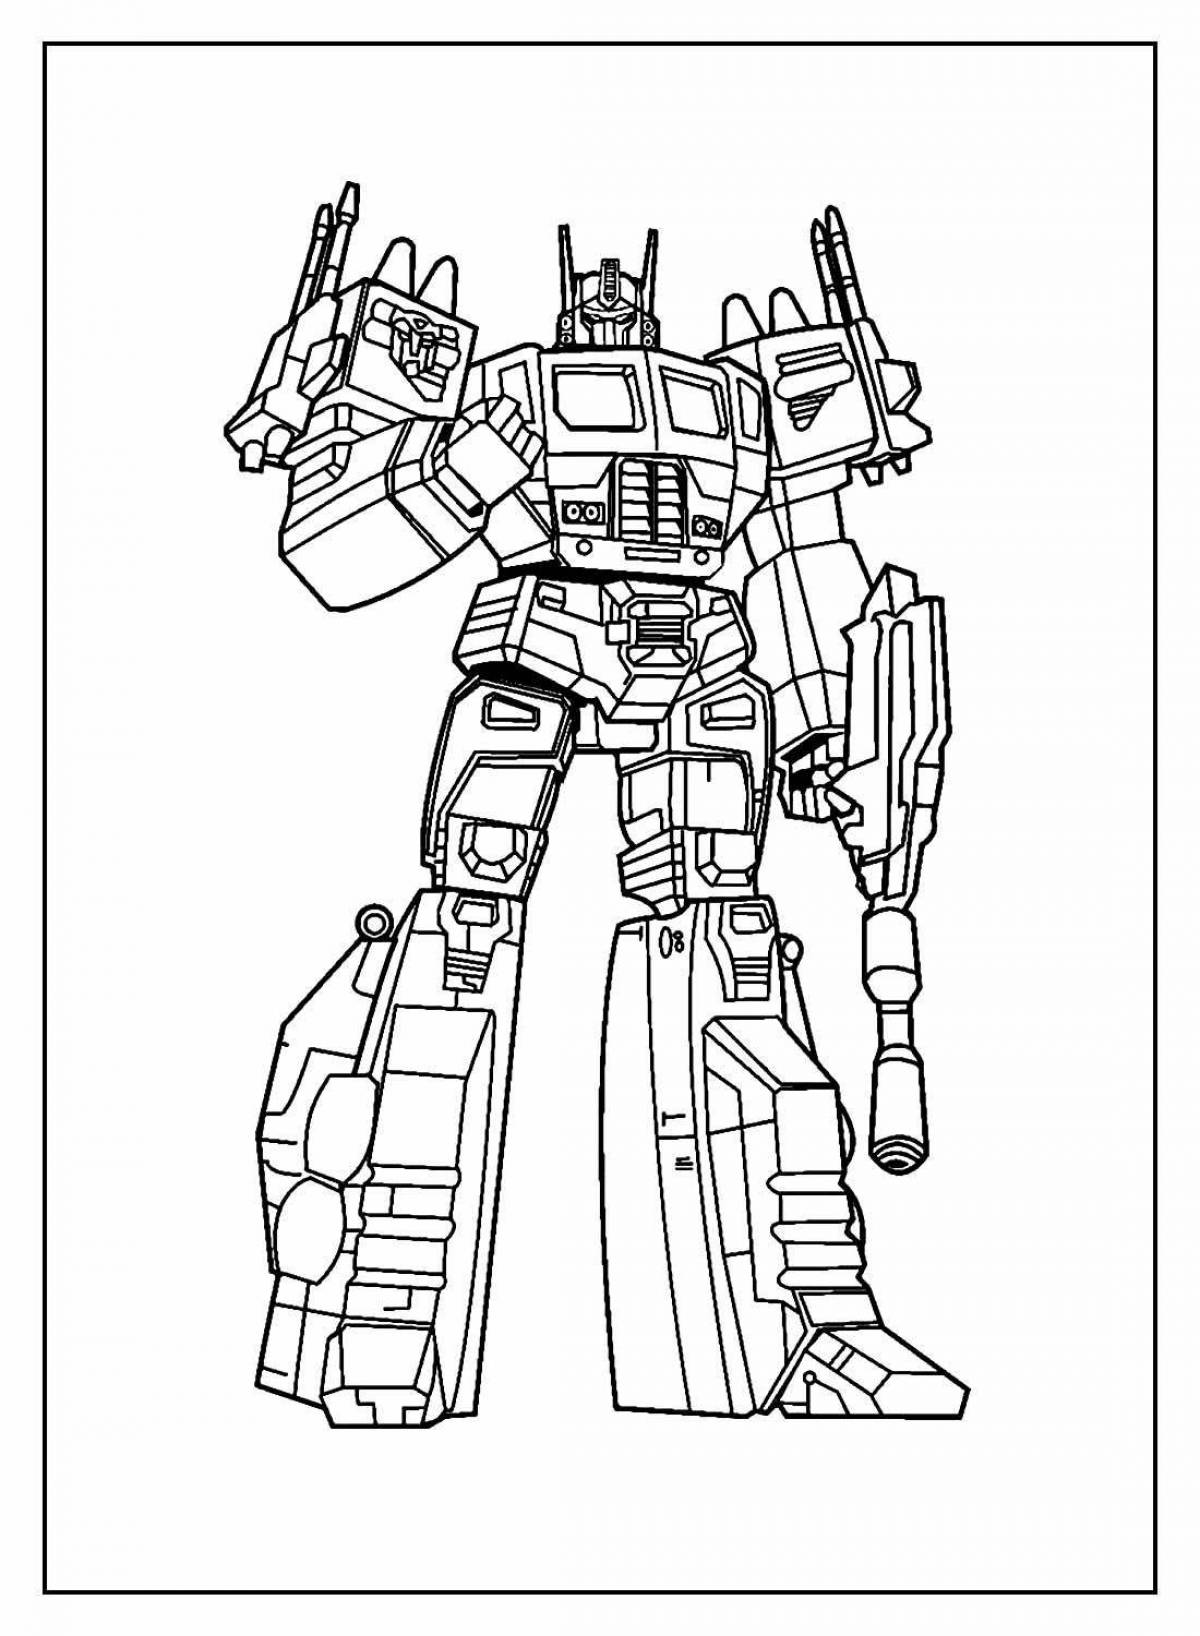 Optimus Magnificent Machine coloring page